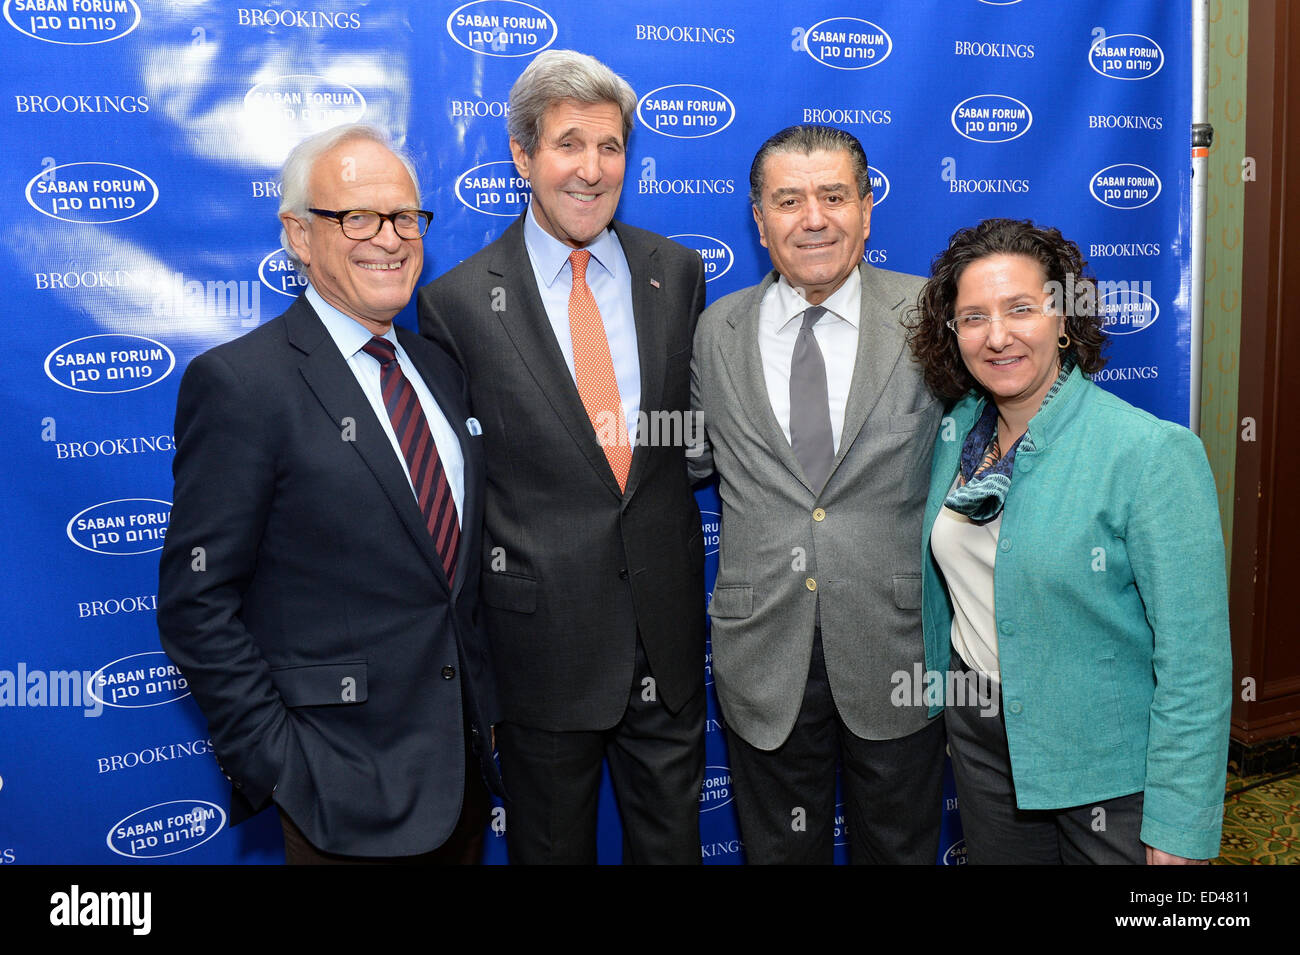 U.S. Secretary of State John Kerry poses for a photo with Ambassador Martin Indyk, Brookings' vice president and director of the Foreign Policy Program, and Saban Forum Chairman Haim Saban at the Brookings Institution's 2014 Saban Forum in Washington, D.C., on December 7, 2014. Stock Photo